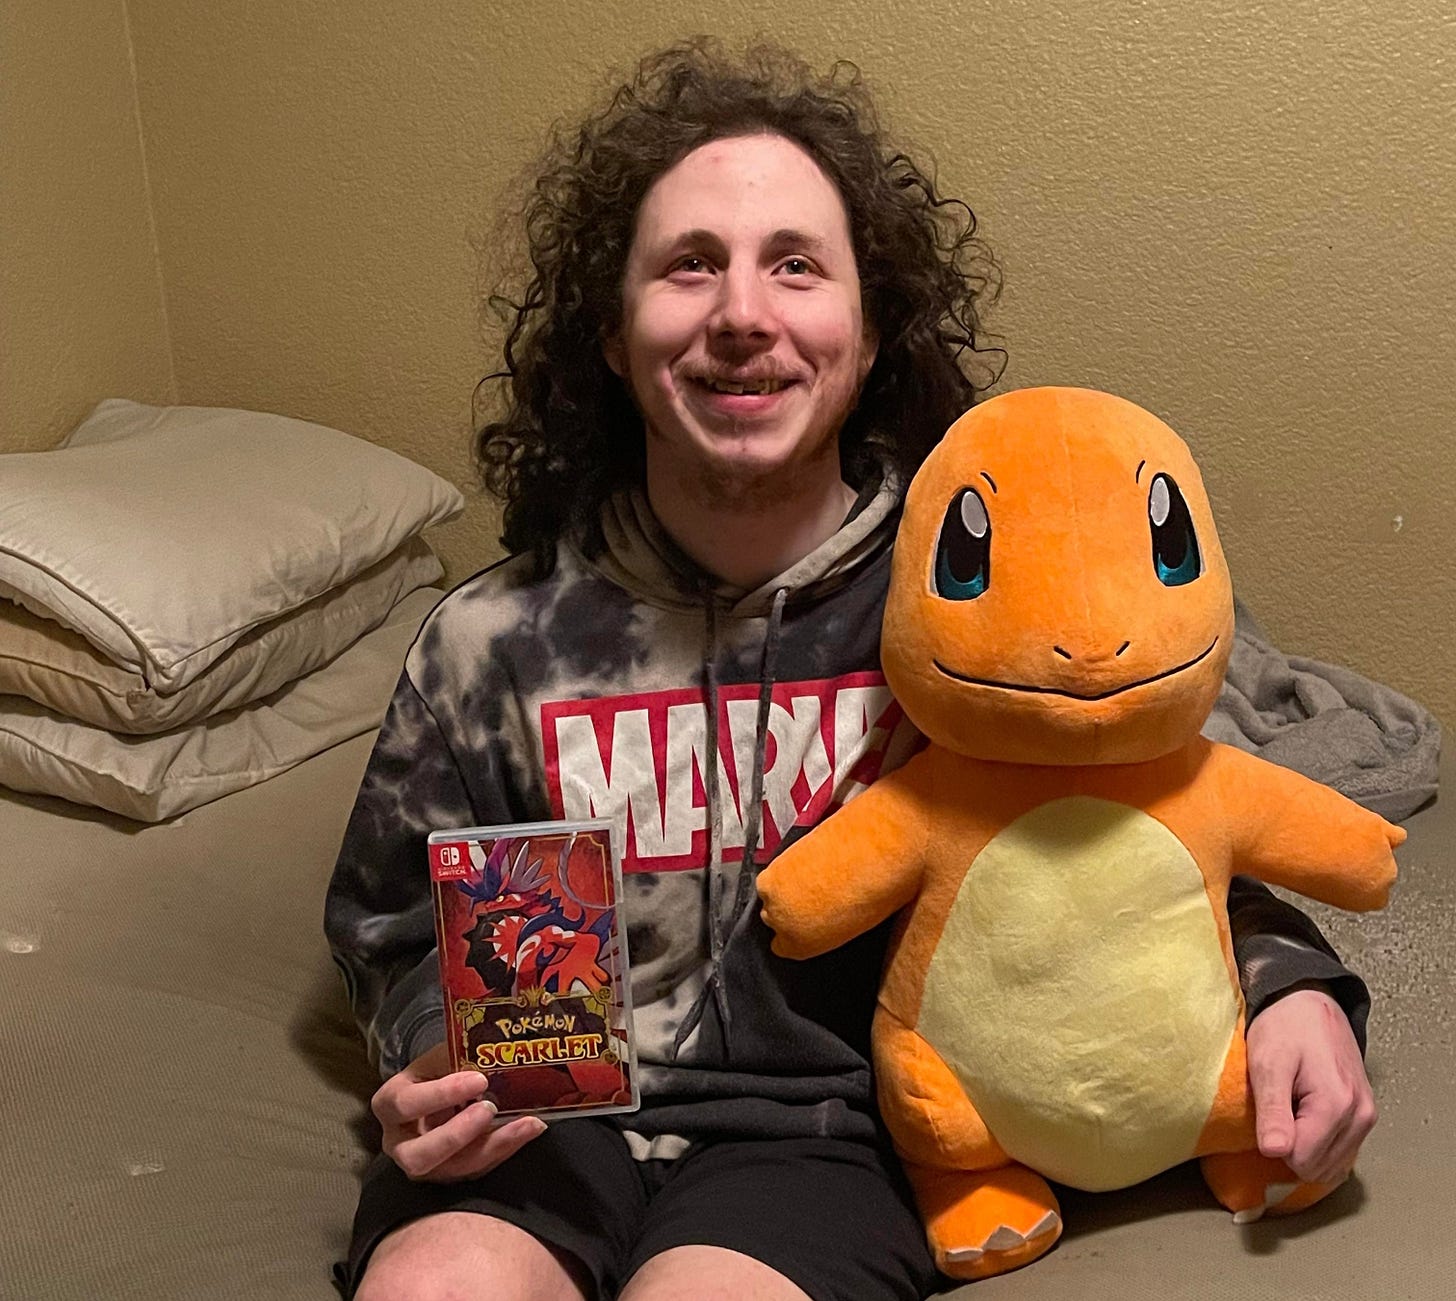 A photograph of Danior with a copy of Pokémon Scarlet and a giant Charmander plush